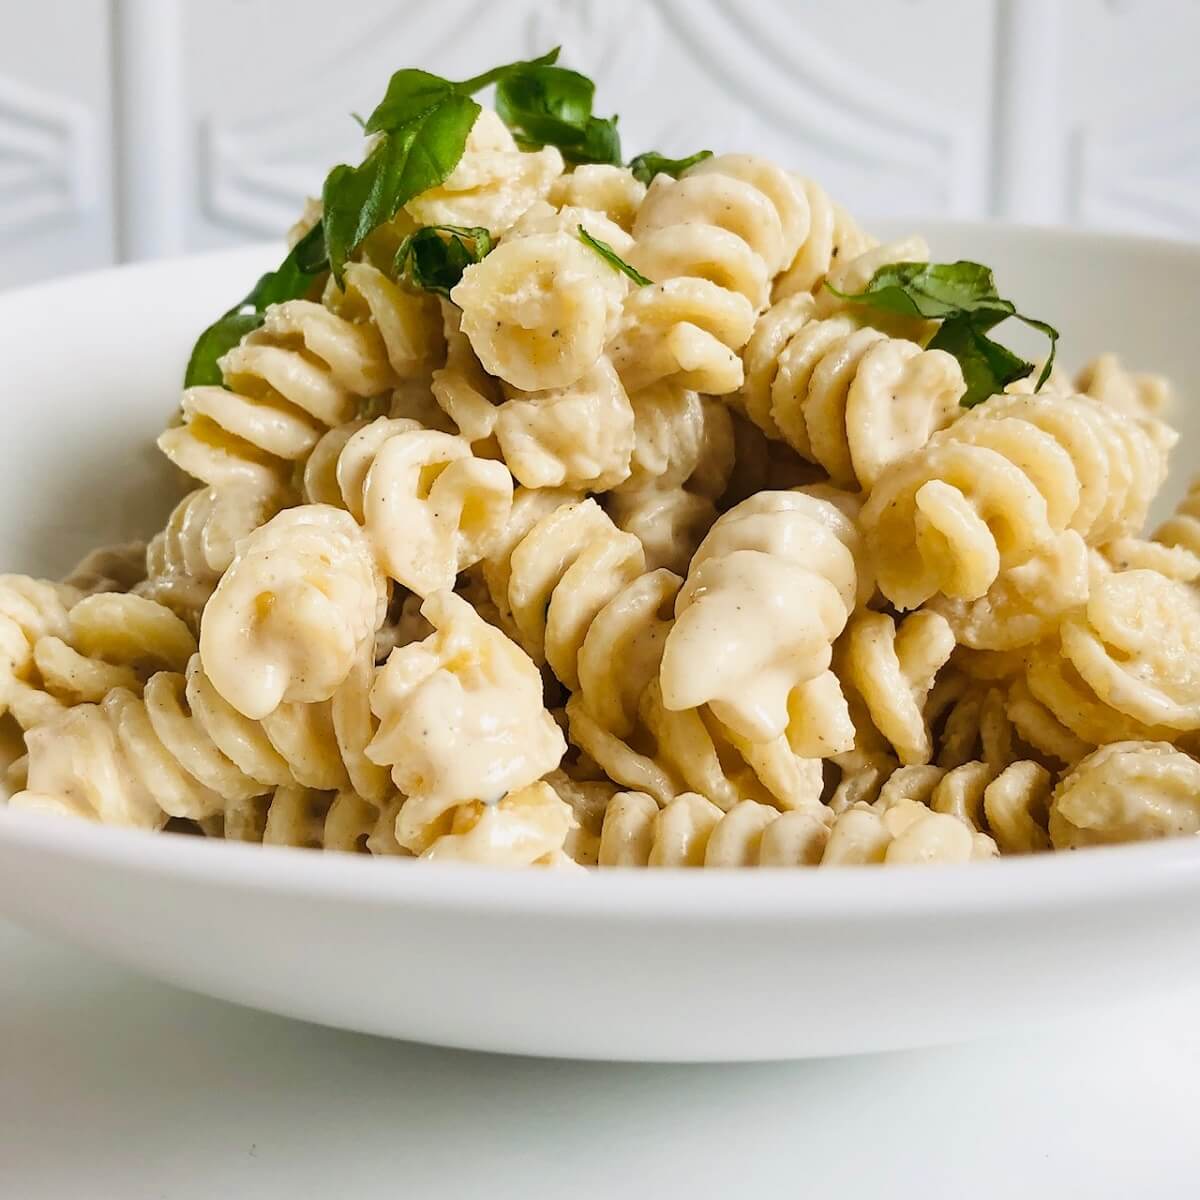 A white bowl filled with tahini pasta in a creamy sauce.